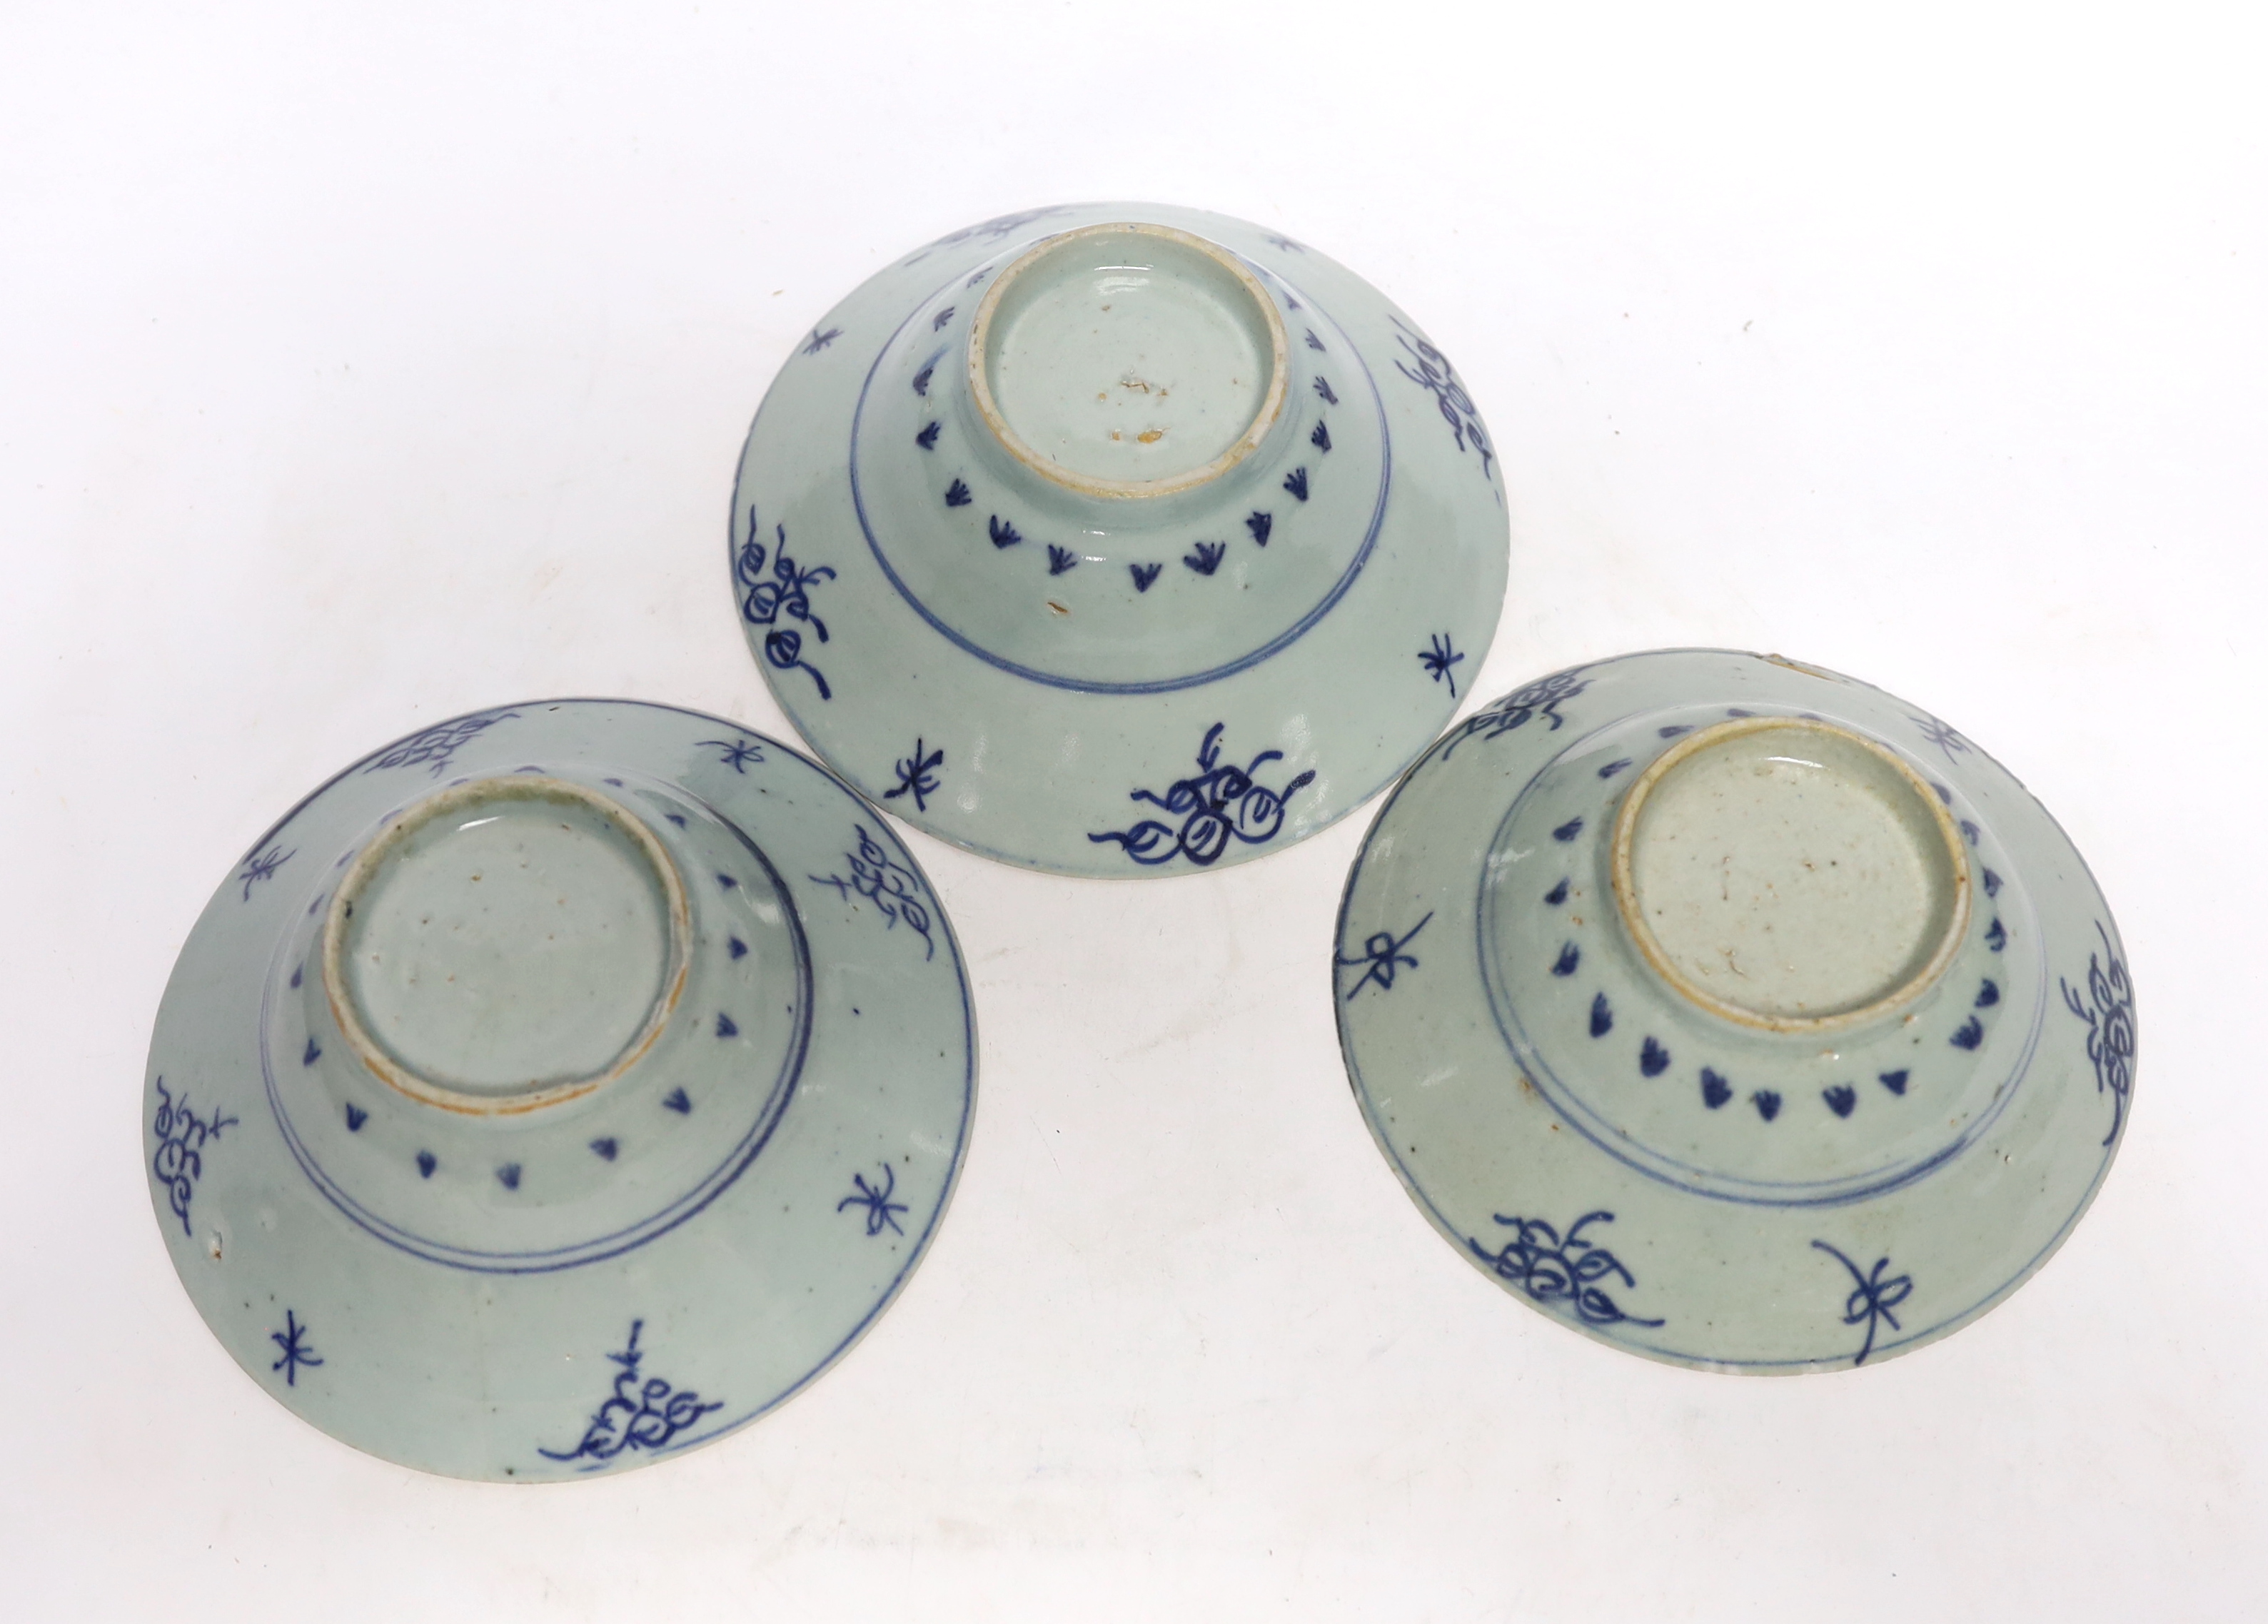 Three 19th century Chinese blue and white bowls, 18cm in diameter